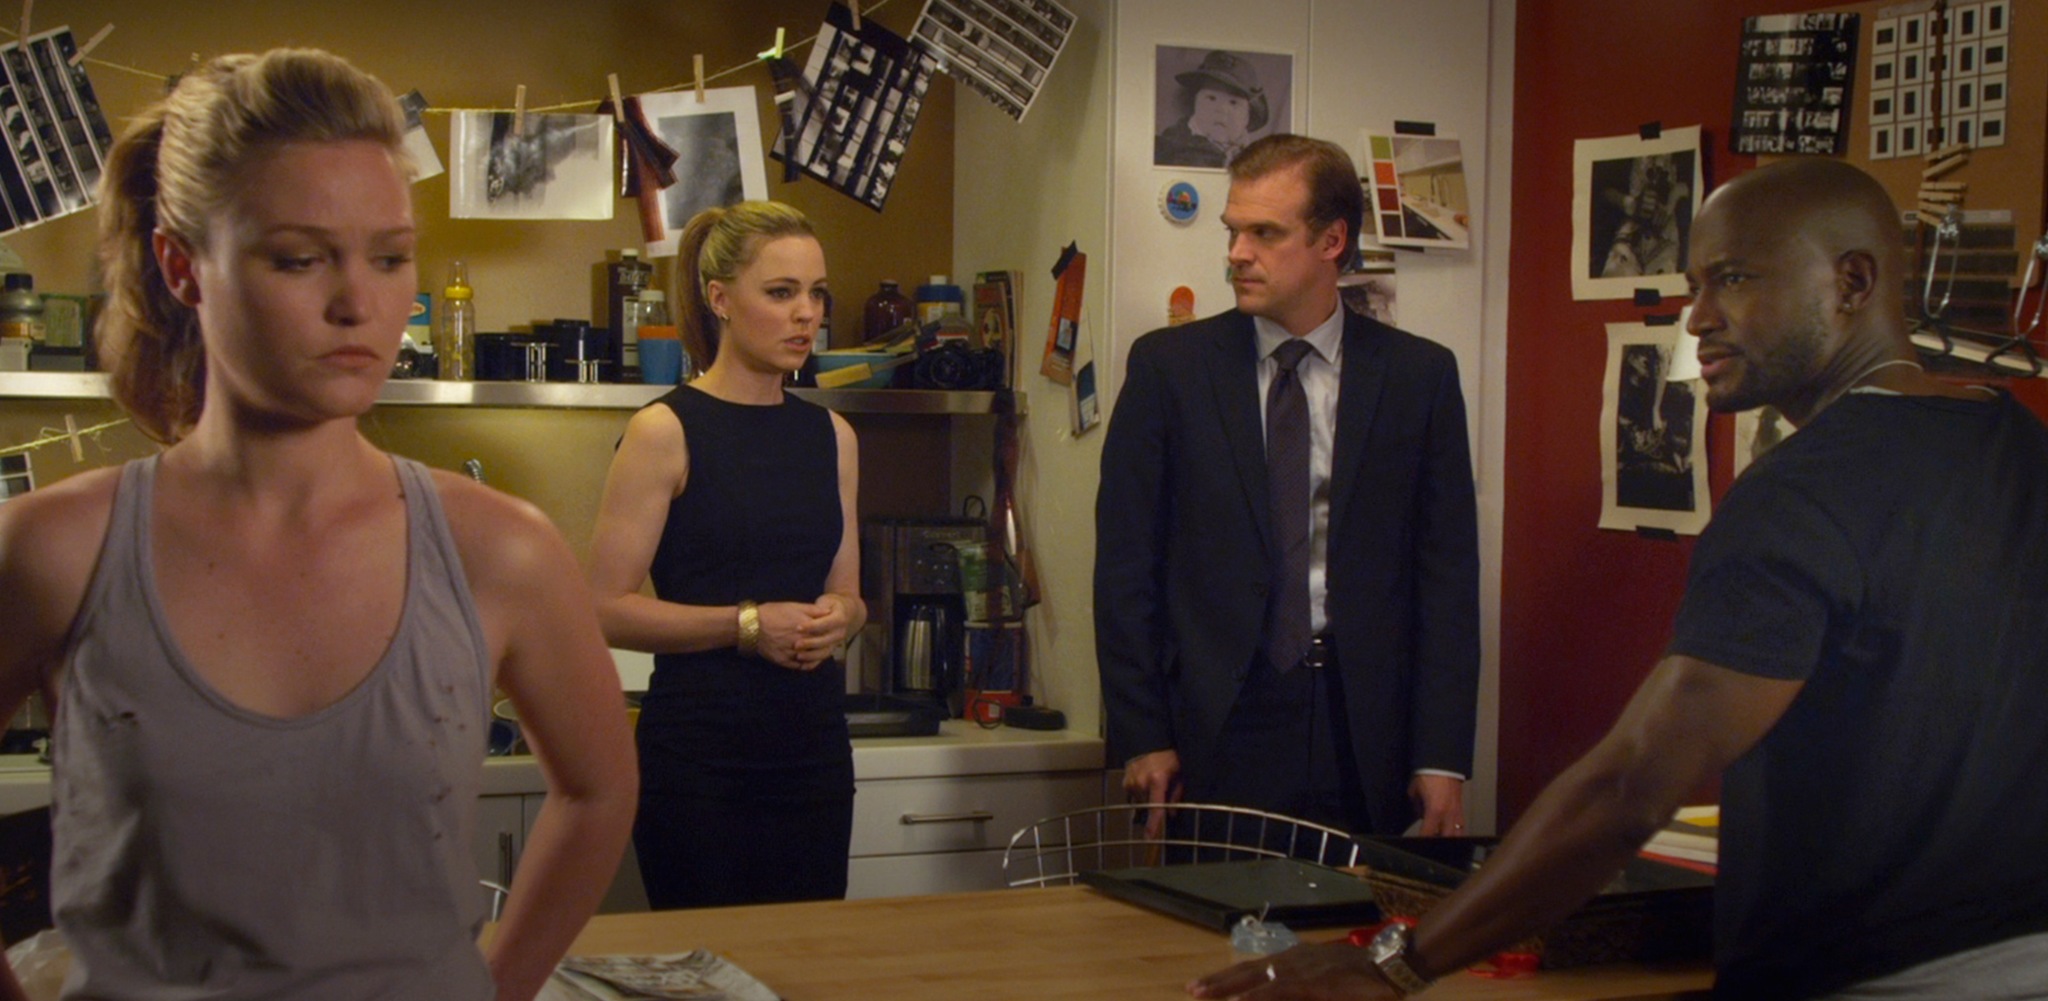 Still of Taye Diggs, Julia Stiles, Melissa George and David Harbour in Between Us (2012)